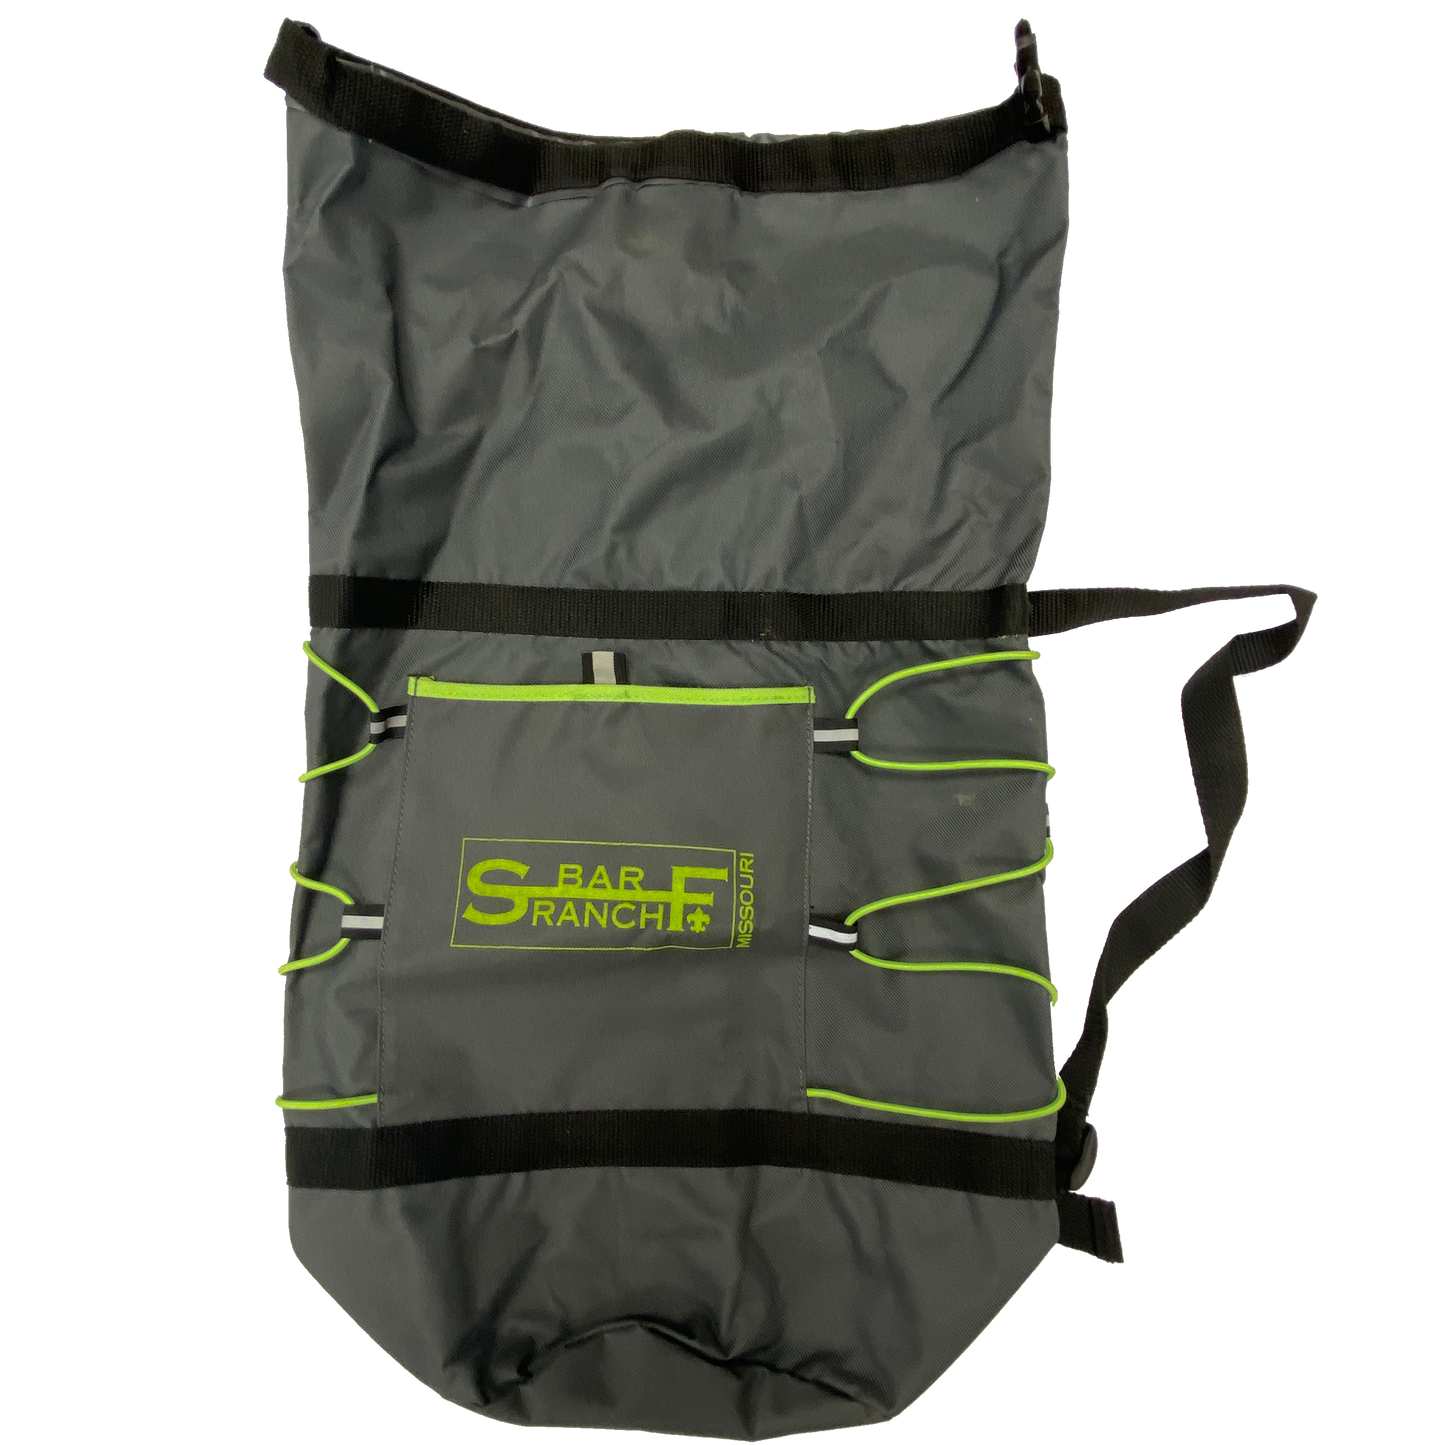 Bag Duffle Backpack Gray with Green S Bar F